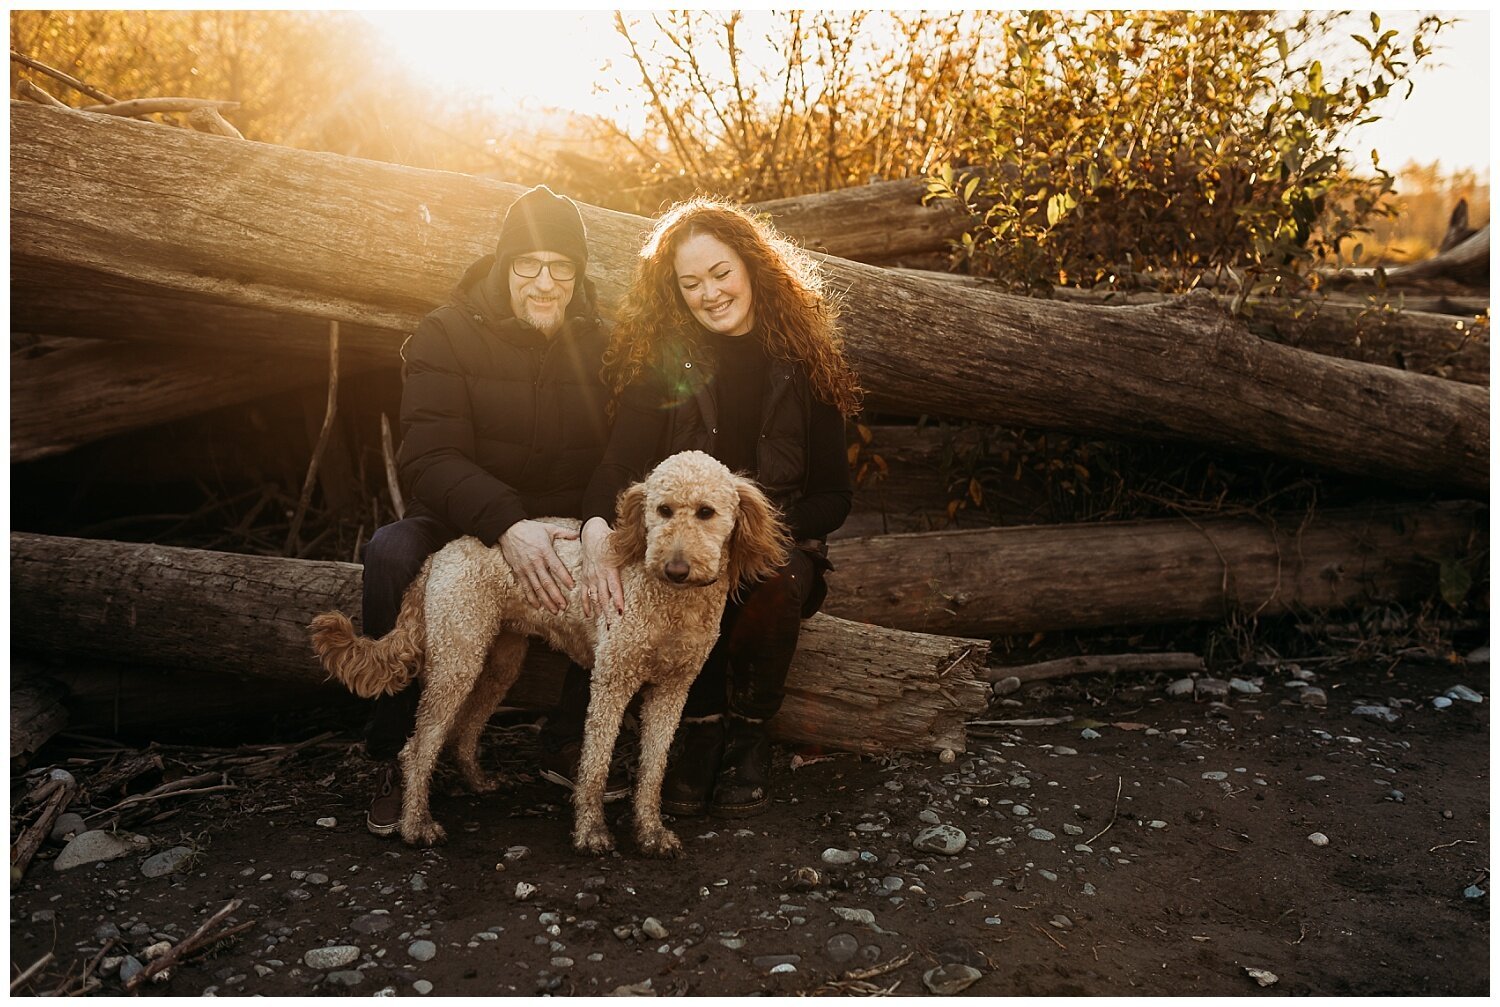 Vedder+River+Couples+-+Anna+Hurley+Photography+-+Chilliwack,+BC+6.jpg